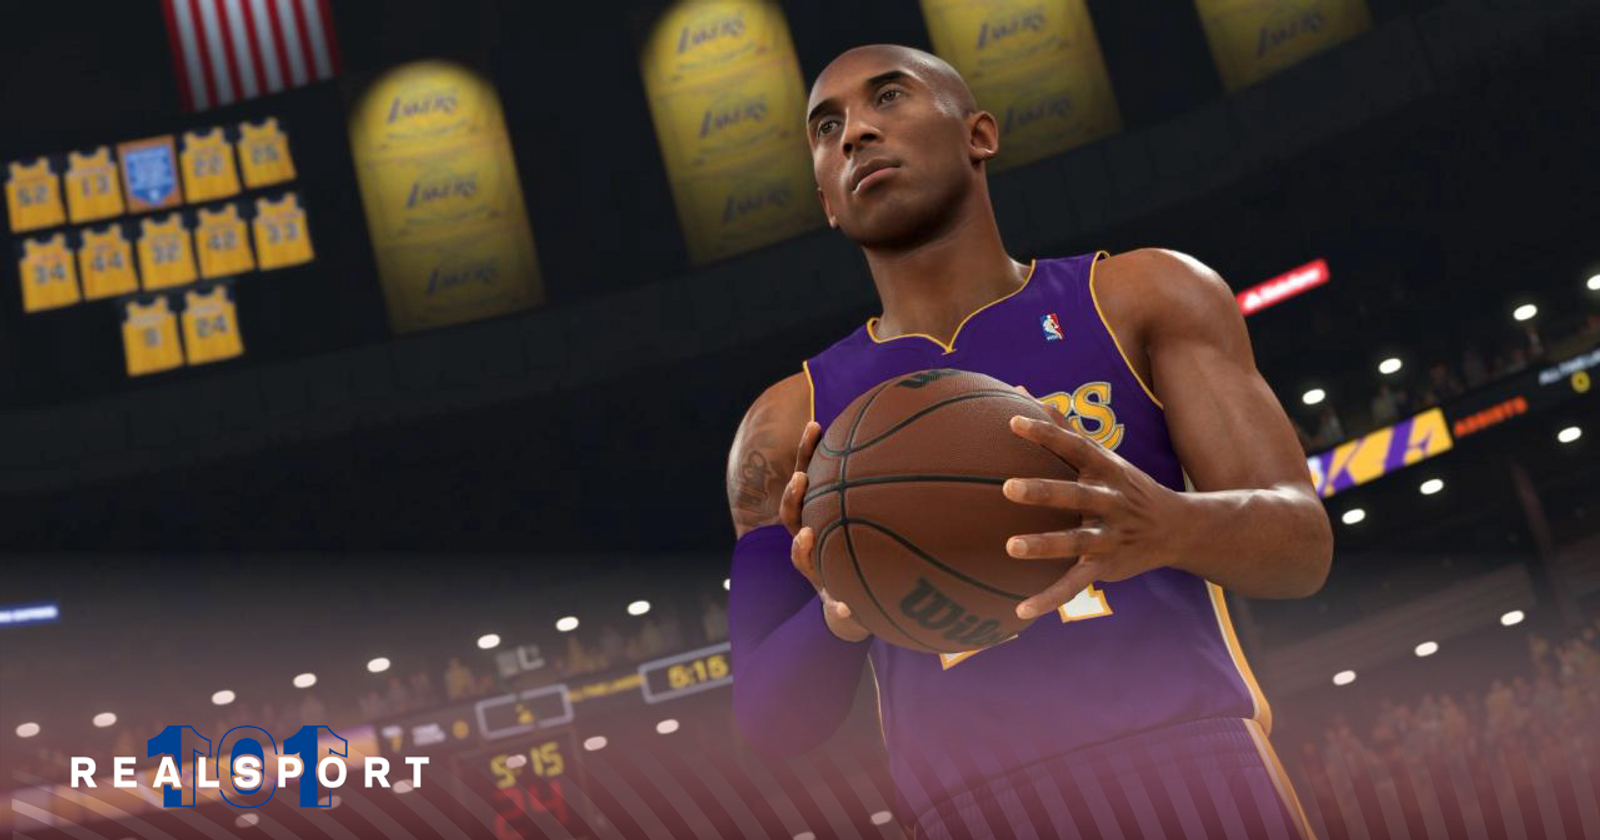 NBA 2K24 is already the second-worst reviewed game on Steam